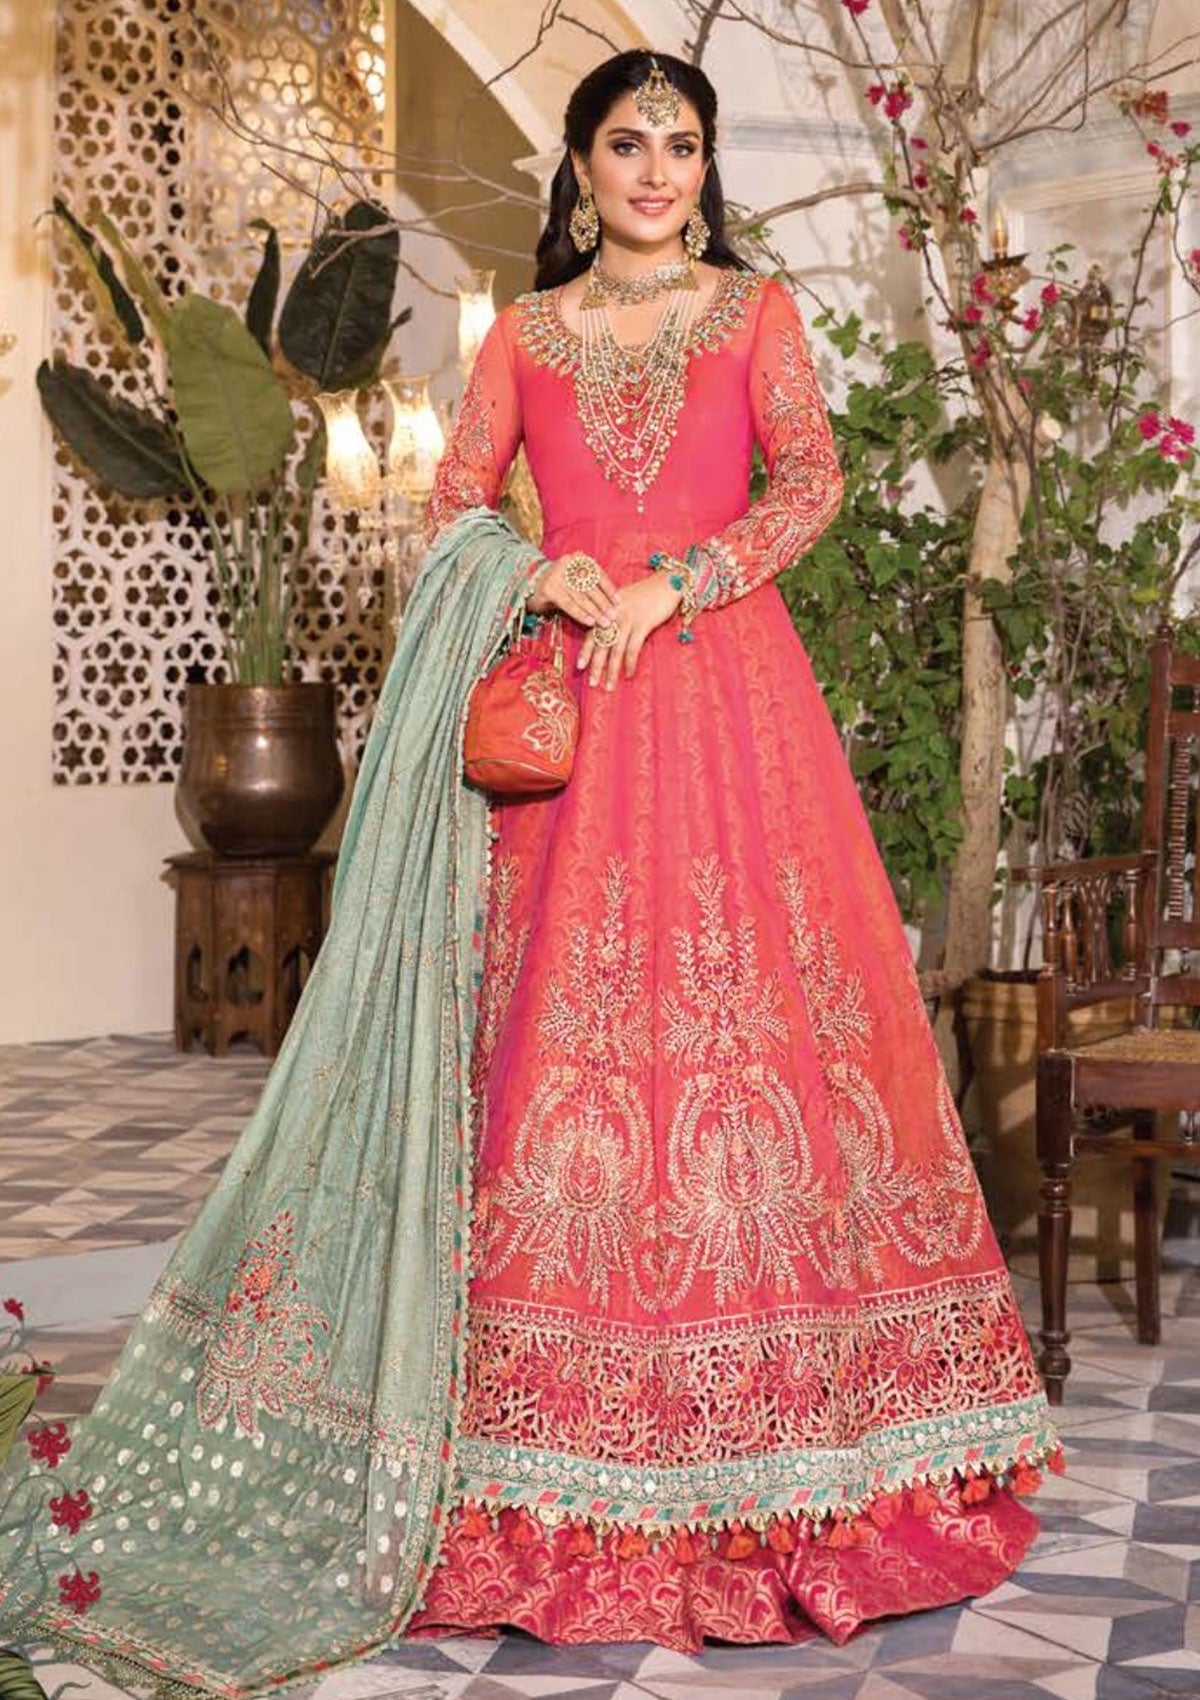 Formal Dress - Maria B - Mbroidered - Heritage Edition - D#2 available at Saleem Fabrics Traditions